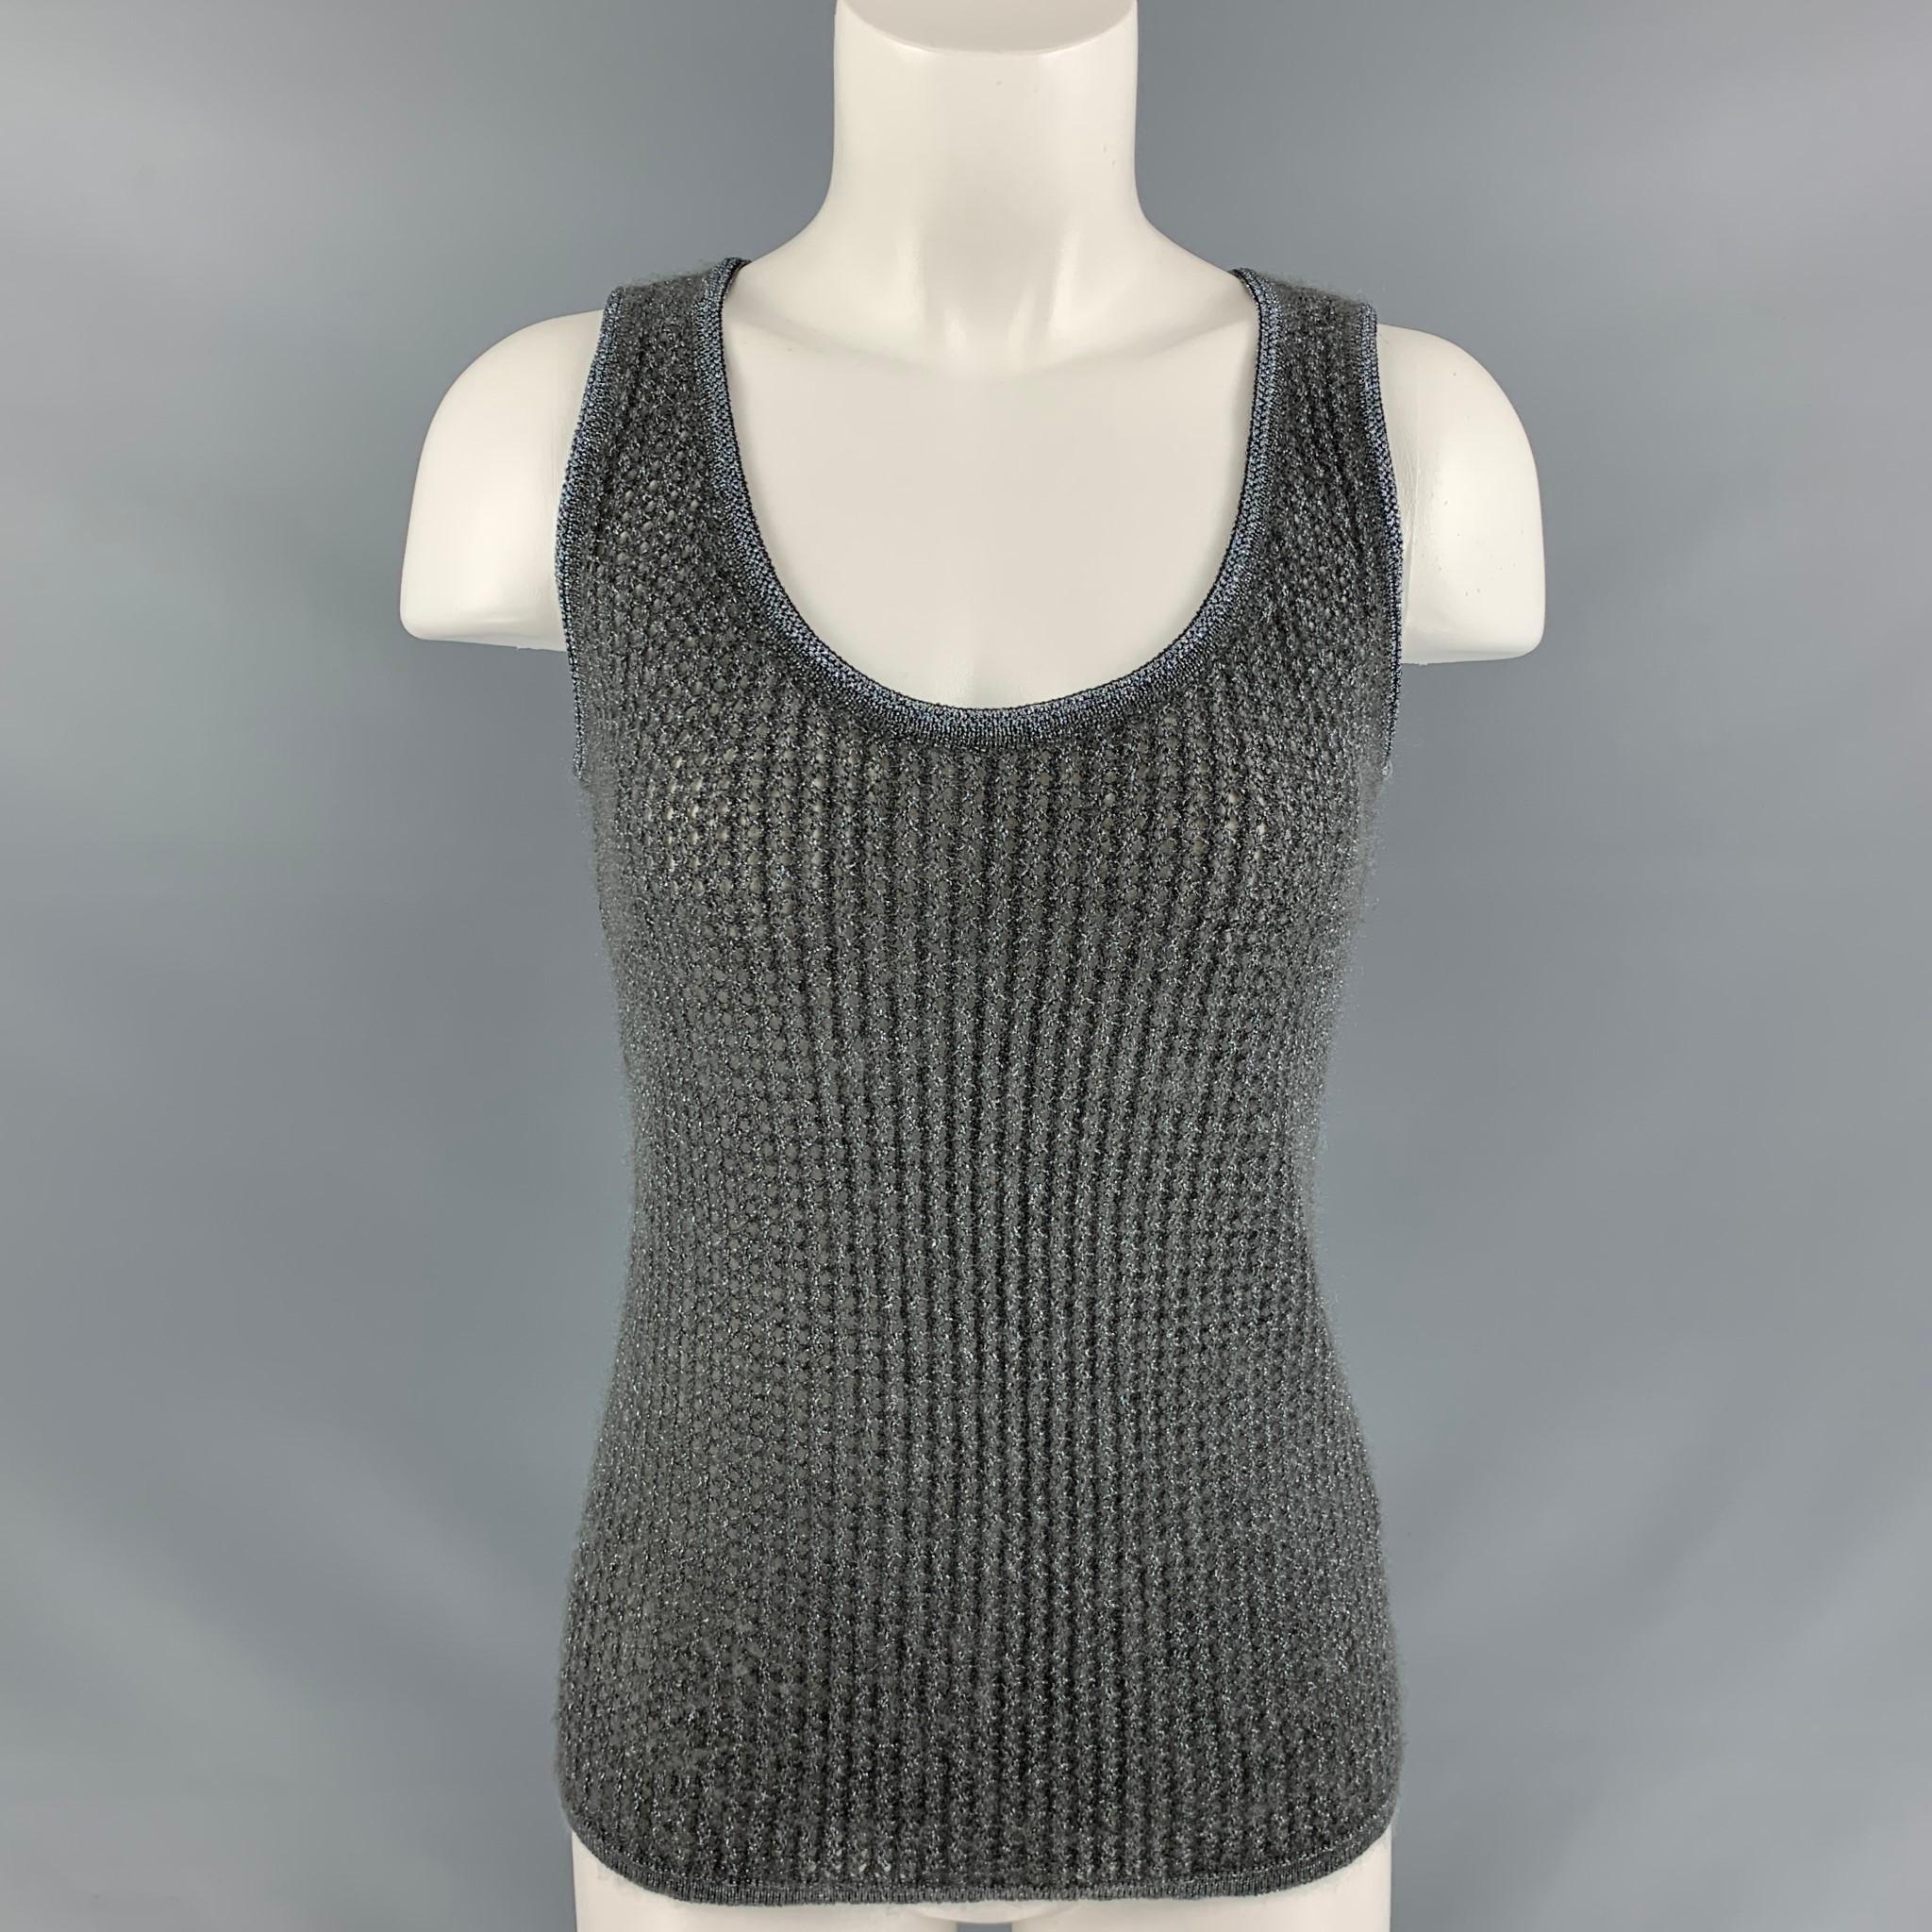 MISSONI casual tank top comes in grey and silver mohair blend knitted featuring U-neck. Made in Italy.

Very Good Pre-Owned Condition.
Marked: 38

Measurements:

Shoulder: 12 in
Bust: 36 in
Length: 23 in

 

SKU: 112356
Category: Casual Top

More